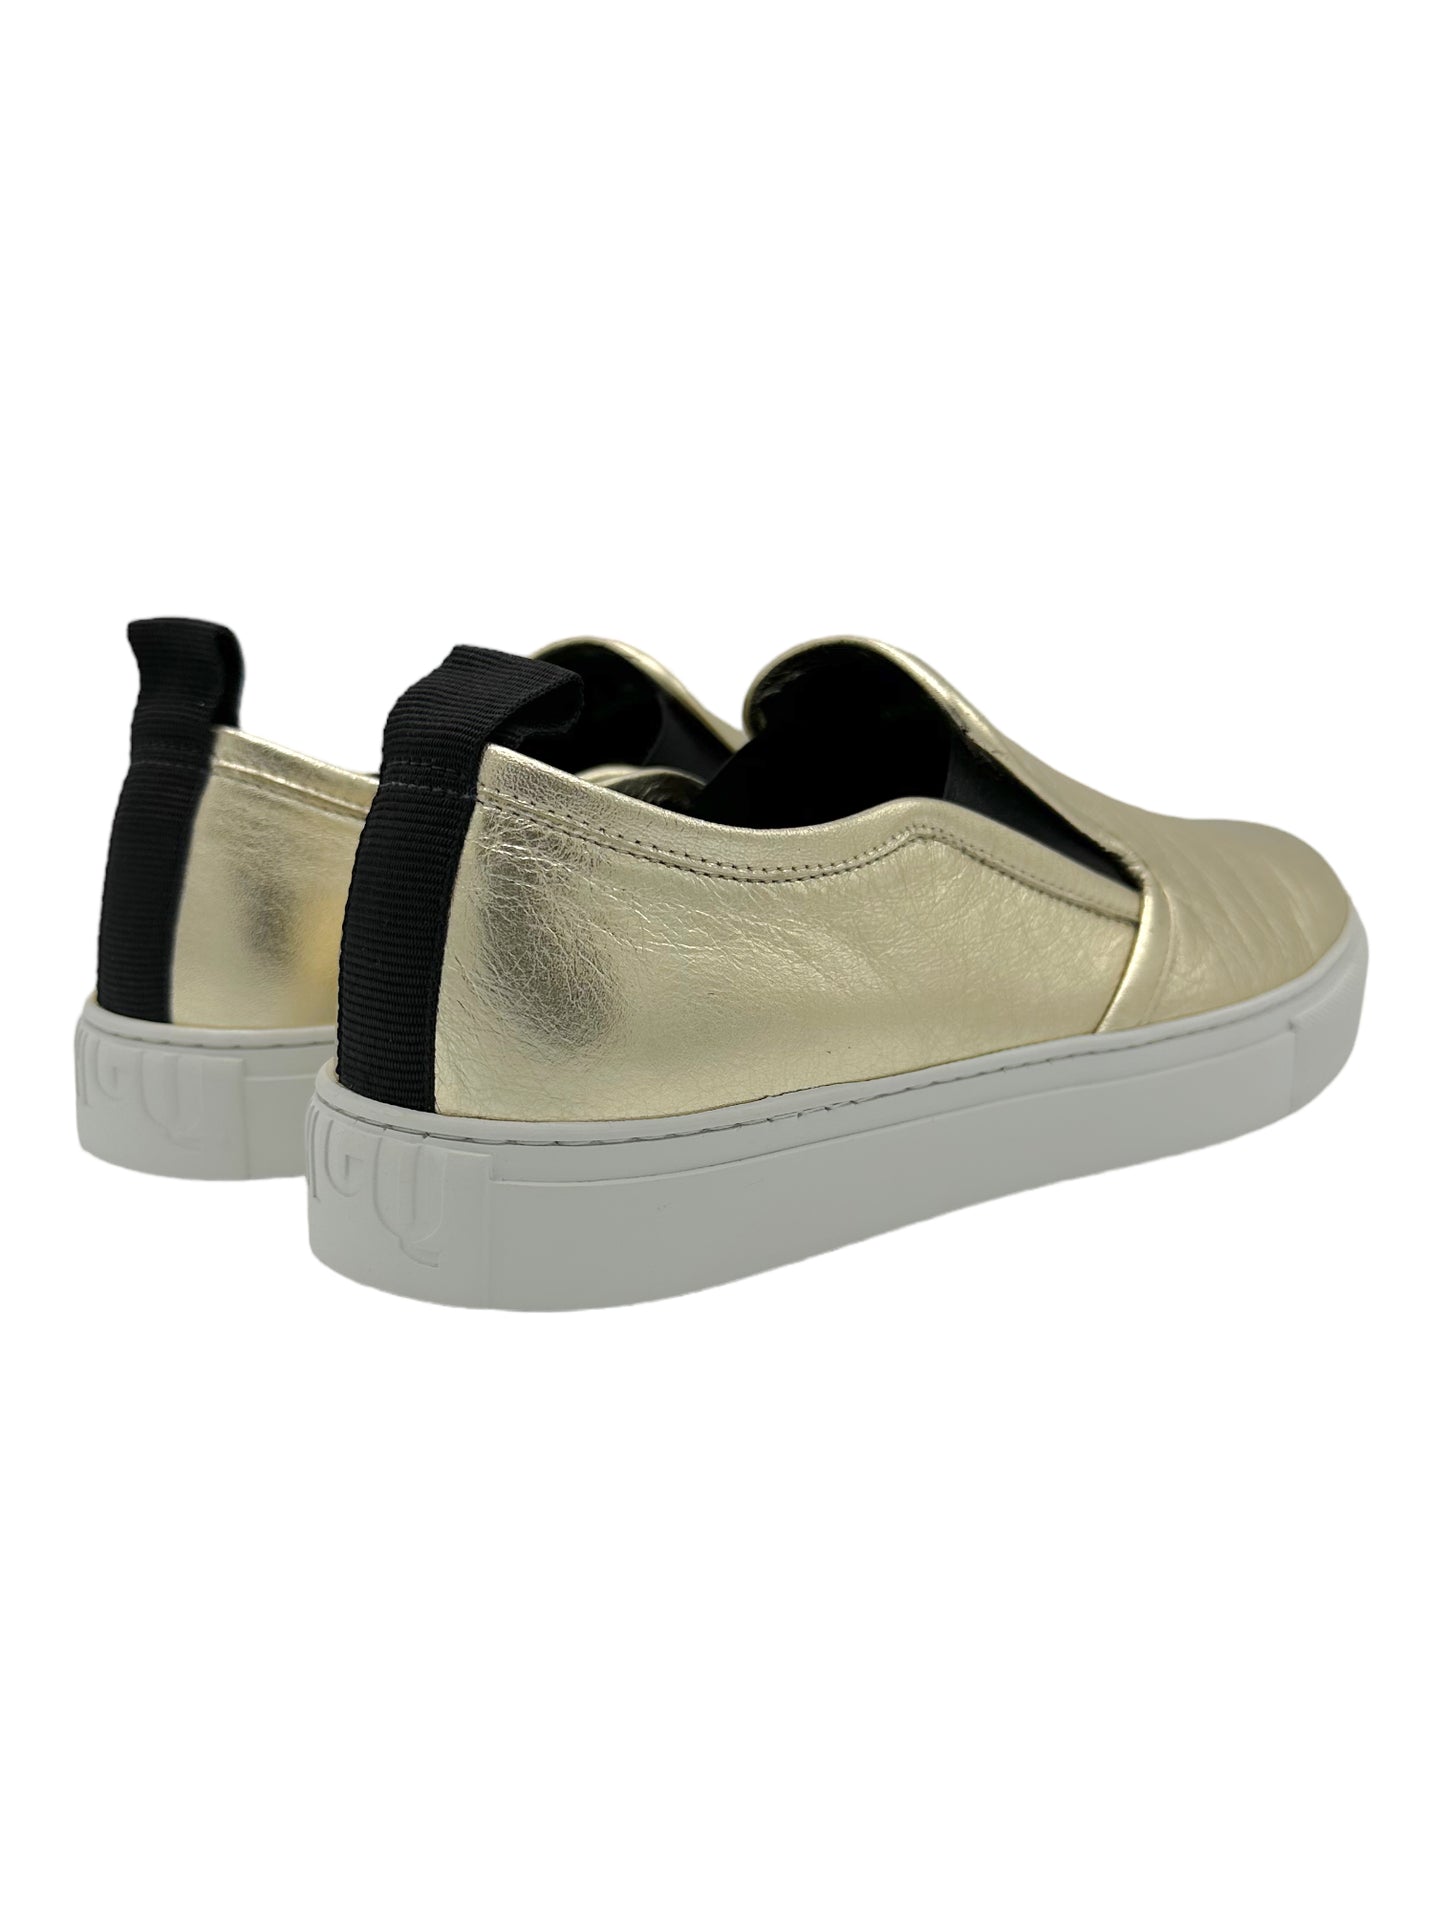 Alexander McQueen Gold & White Slip On Sneaker - Genuine Design Luxury Consignment for Men. New & Pre-Owned Clothing, Shoes, & Accessories. Calgary, Canada